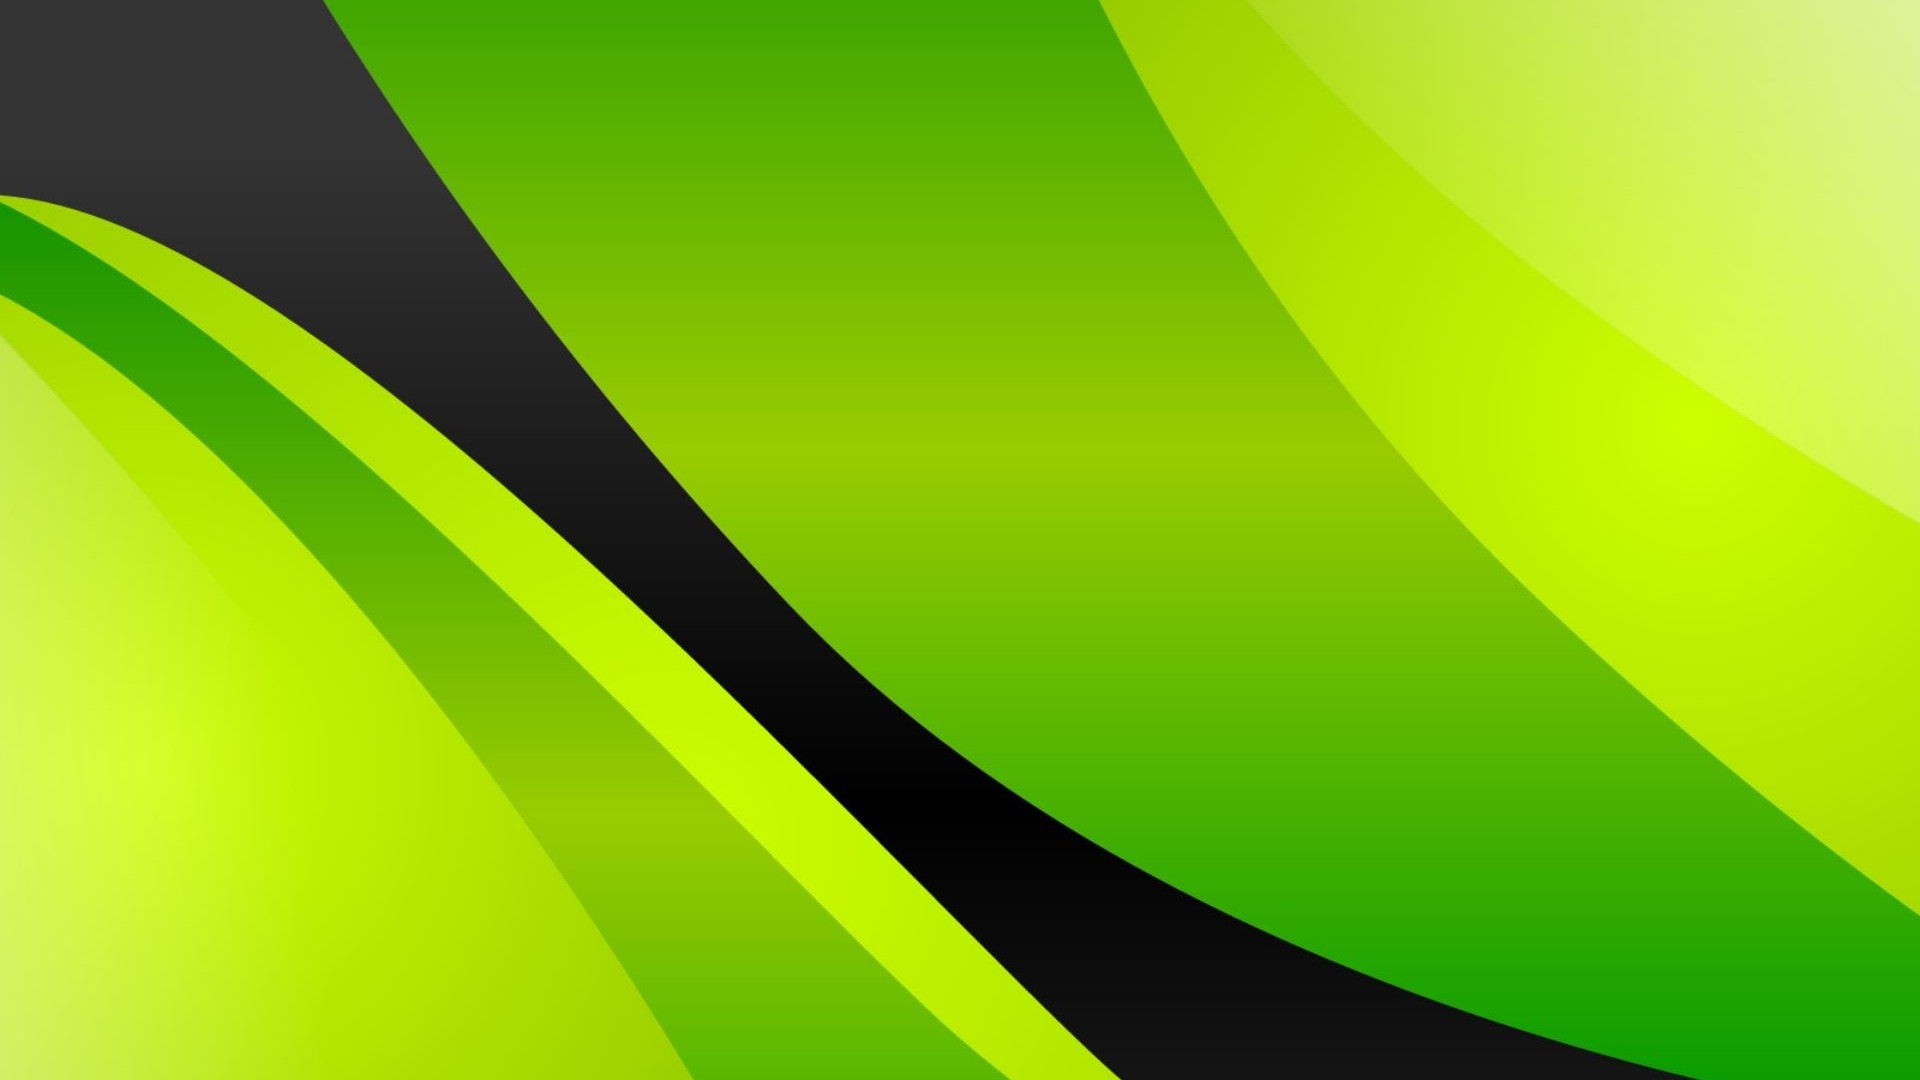 Free Download Green Abstract Wallpaper 1920x1080 Green Abstract